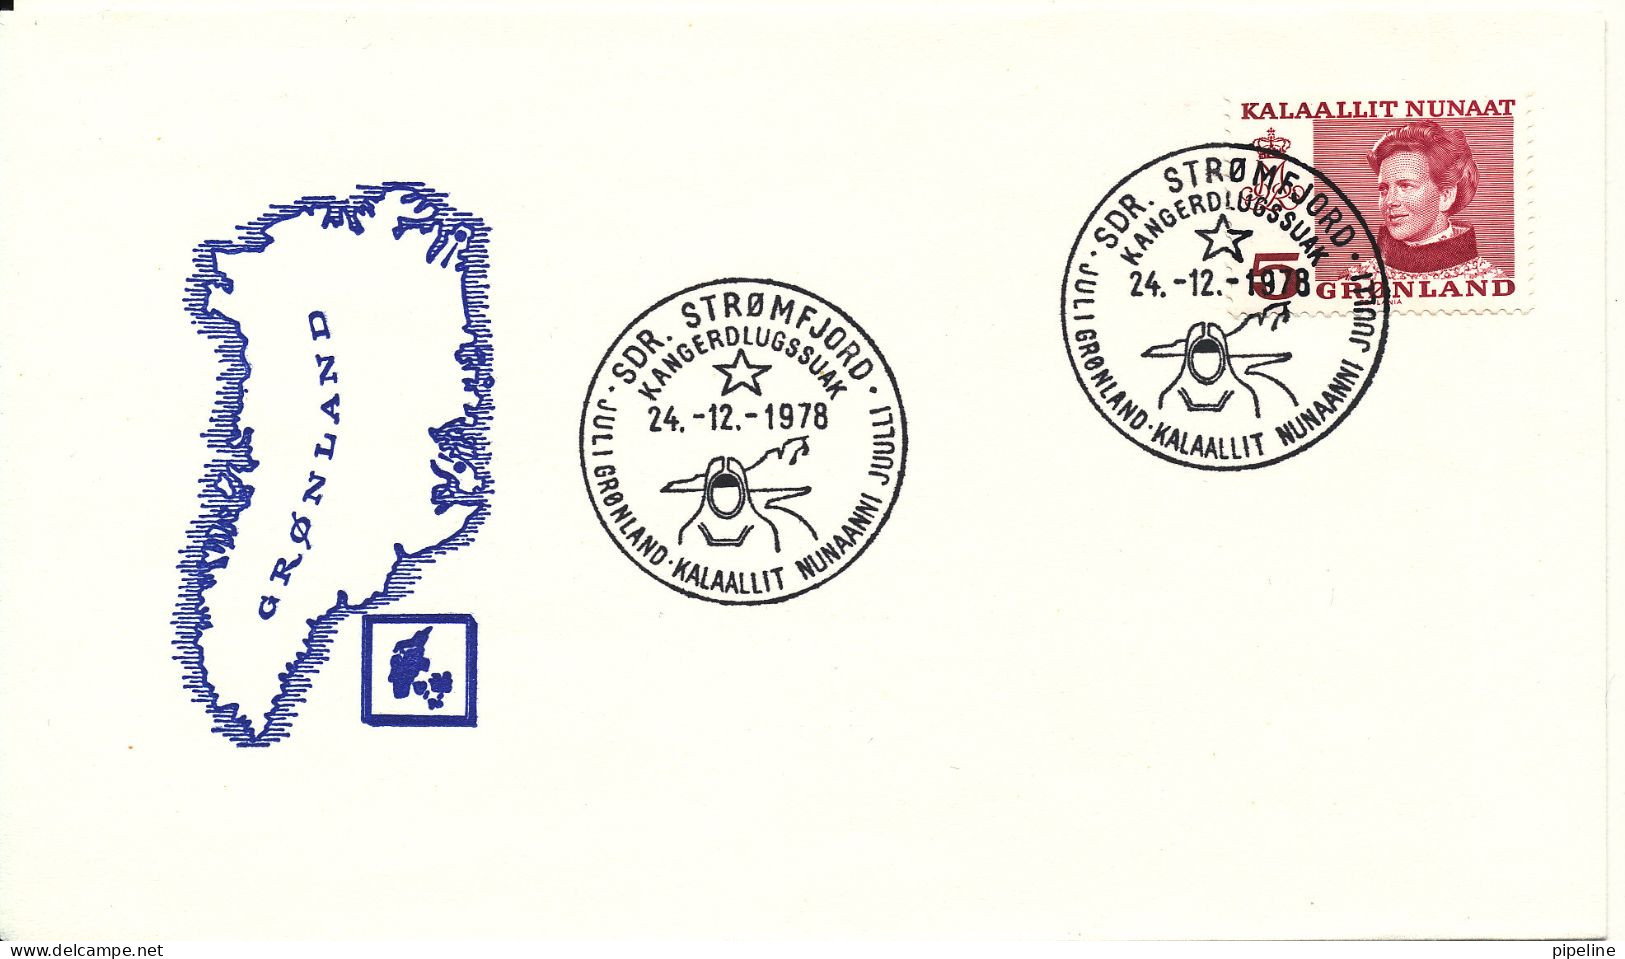 Greenland Cover With Special Christmas Postmark Sdr. Strömfjord 24-12-1978 - Covers & Documents